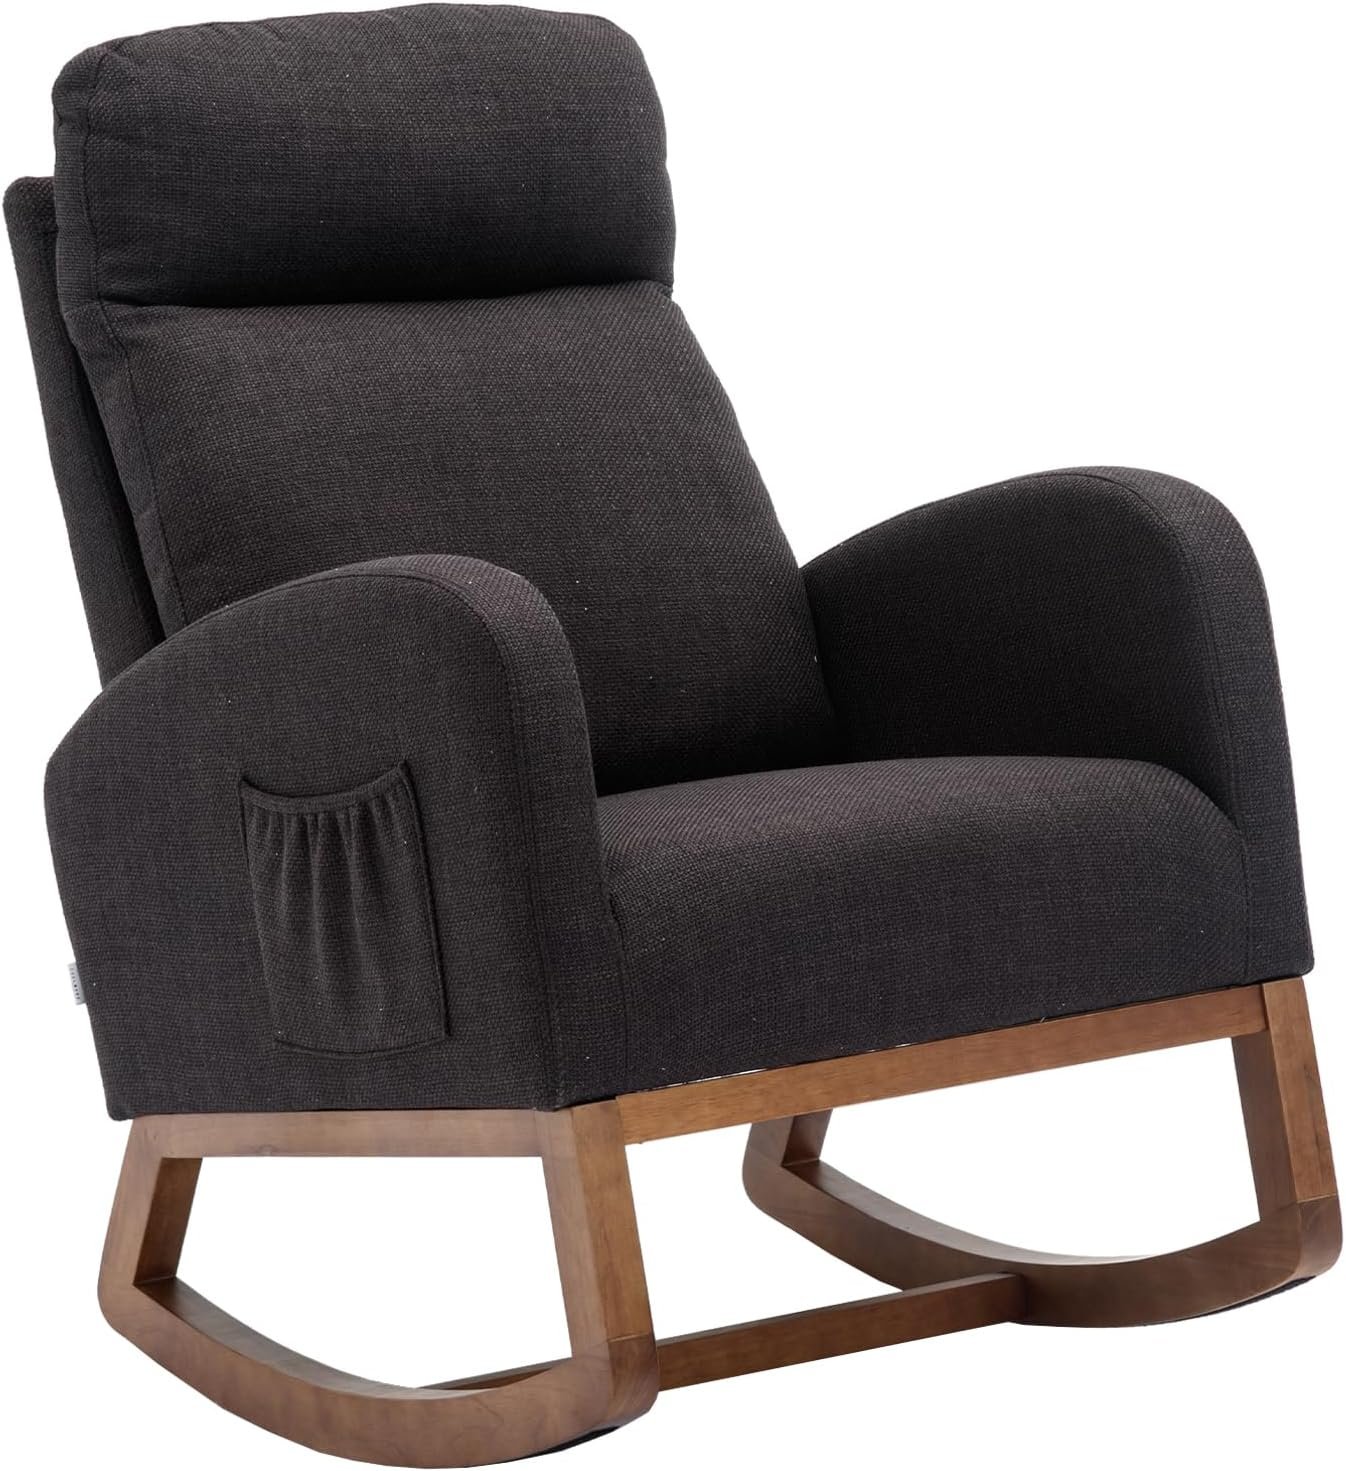 HomSof Rocking Chair Nursery Black Polyester Modern Lounge Chair for Living Room and Bedroom